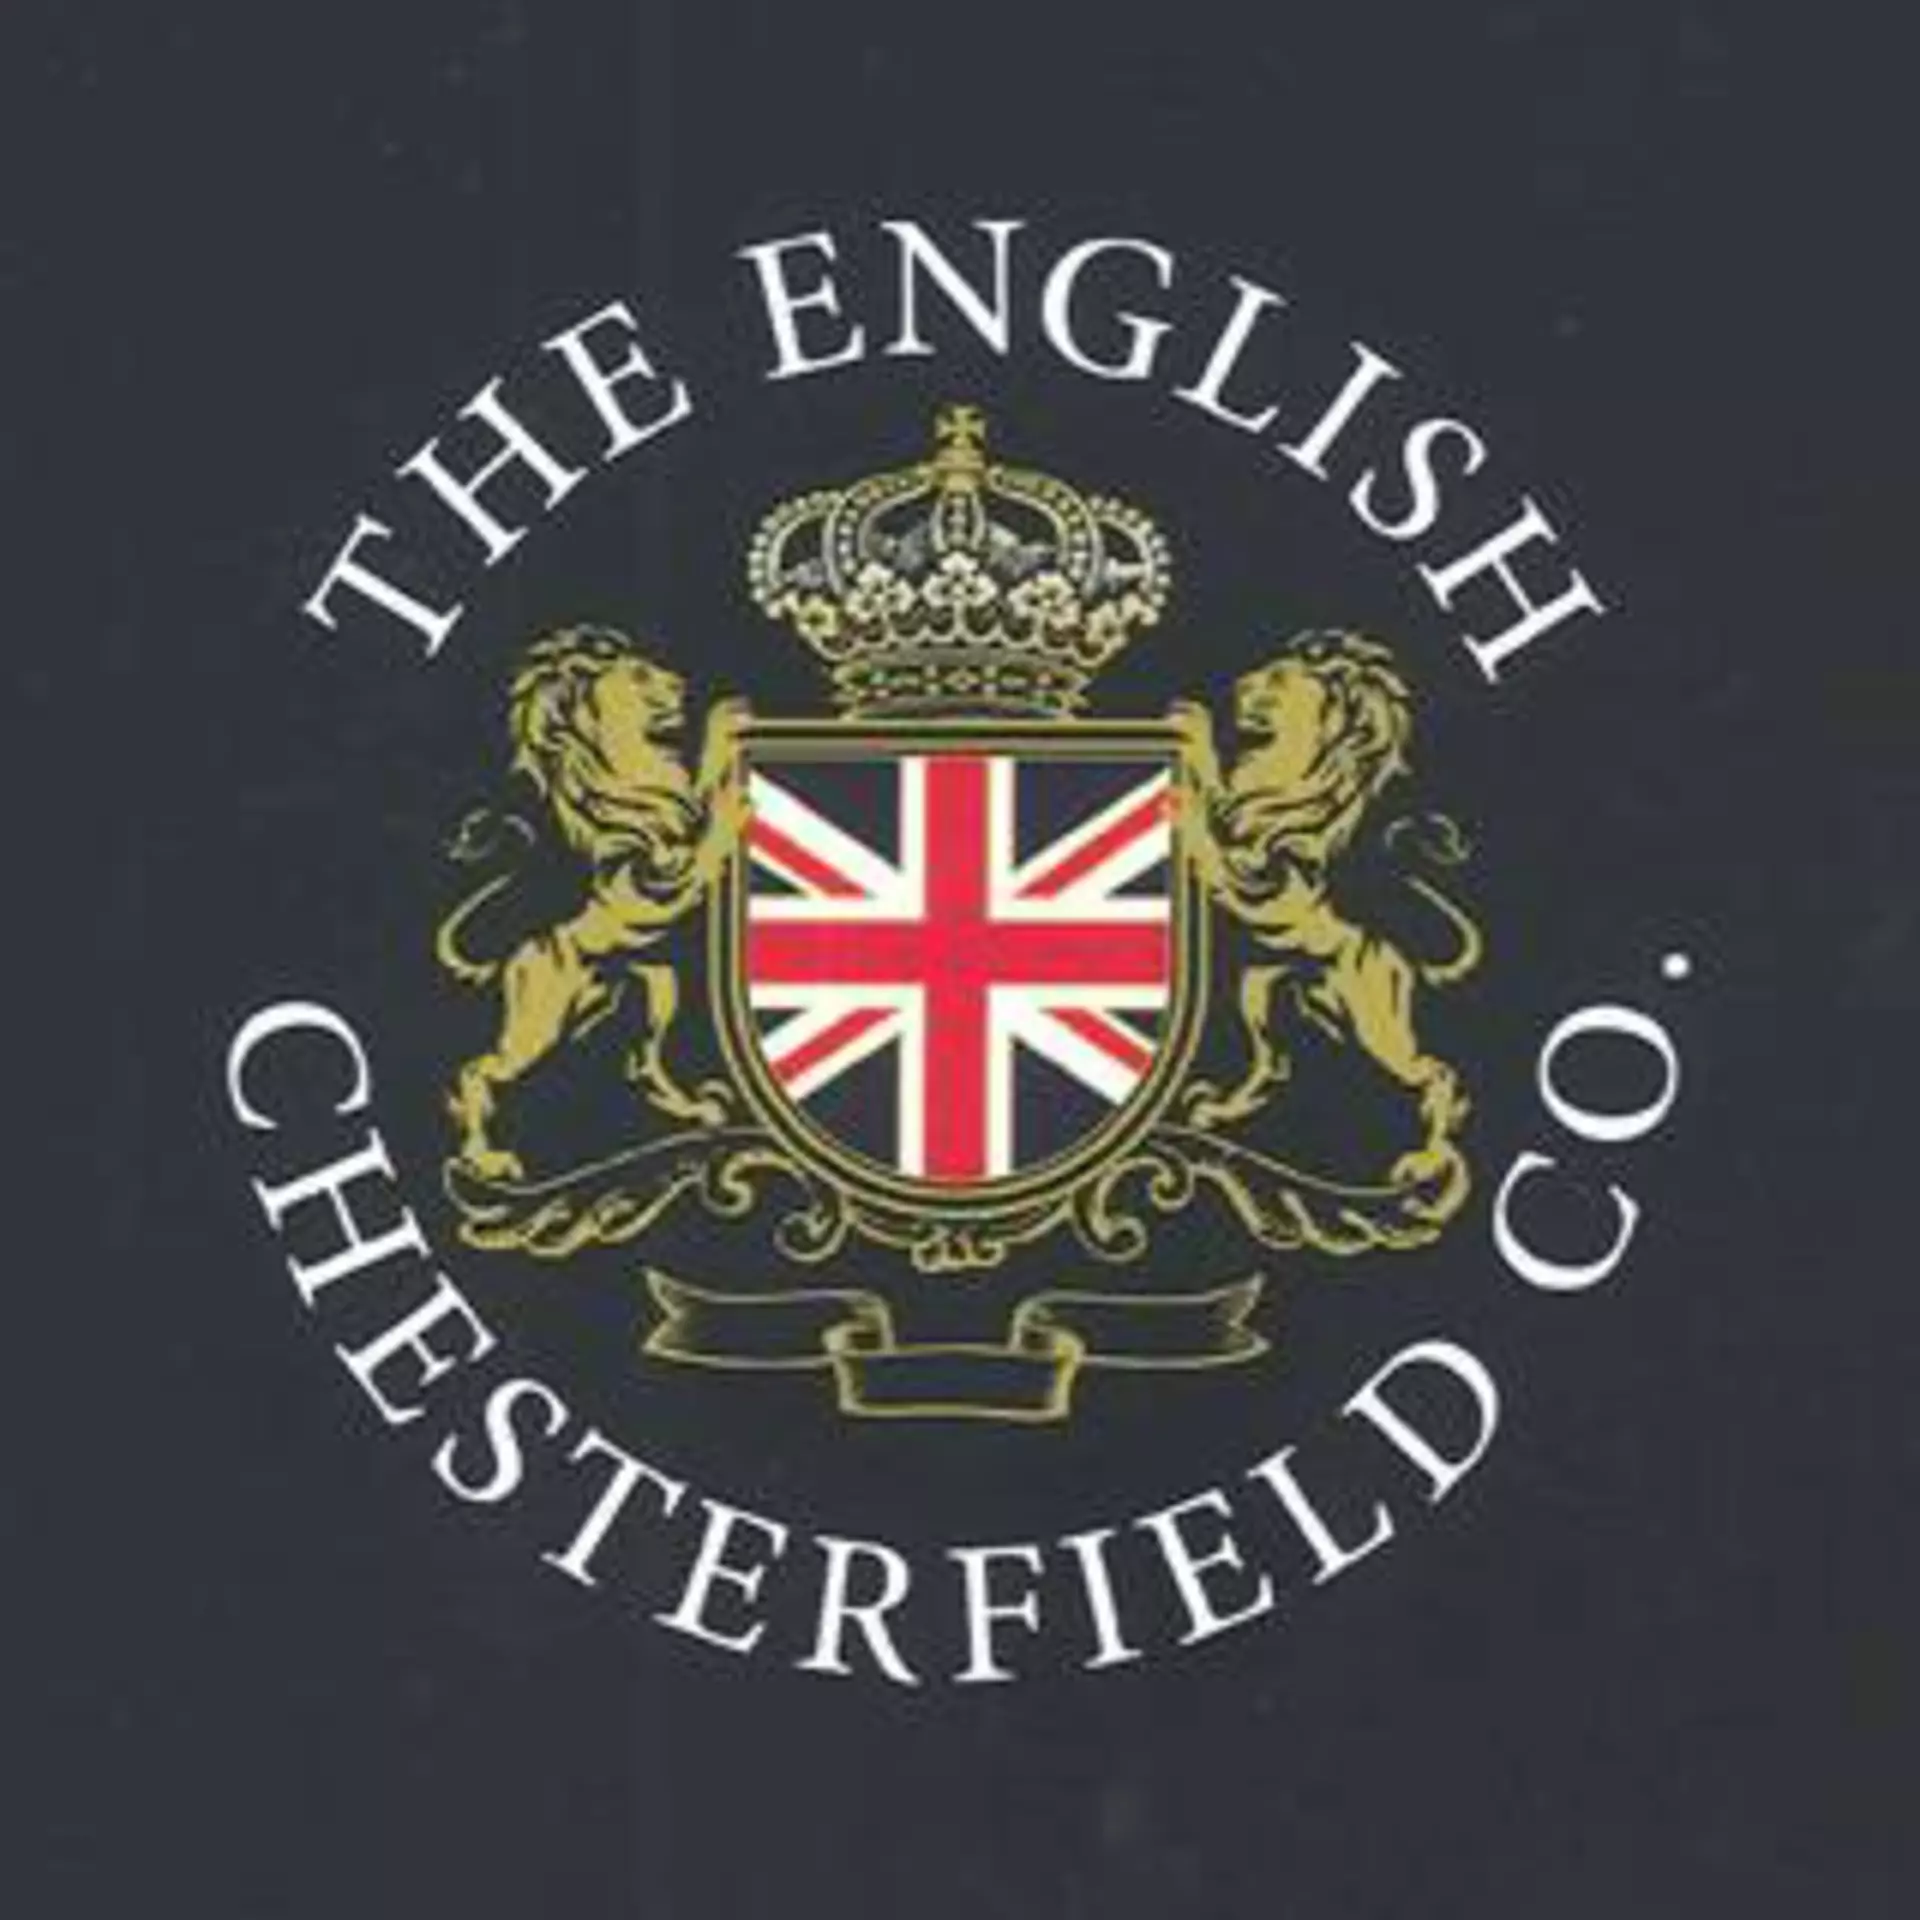 The English Chesterfield Company